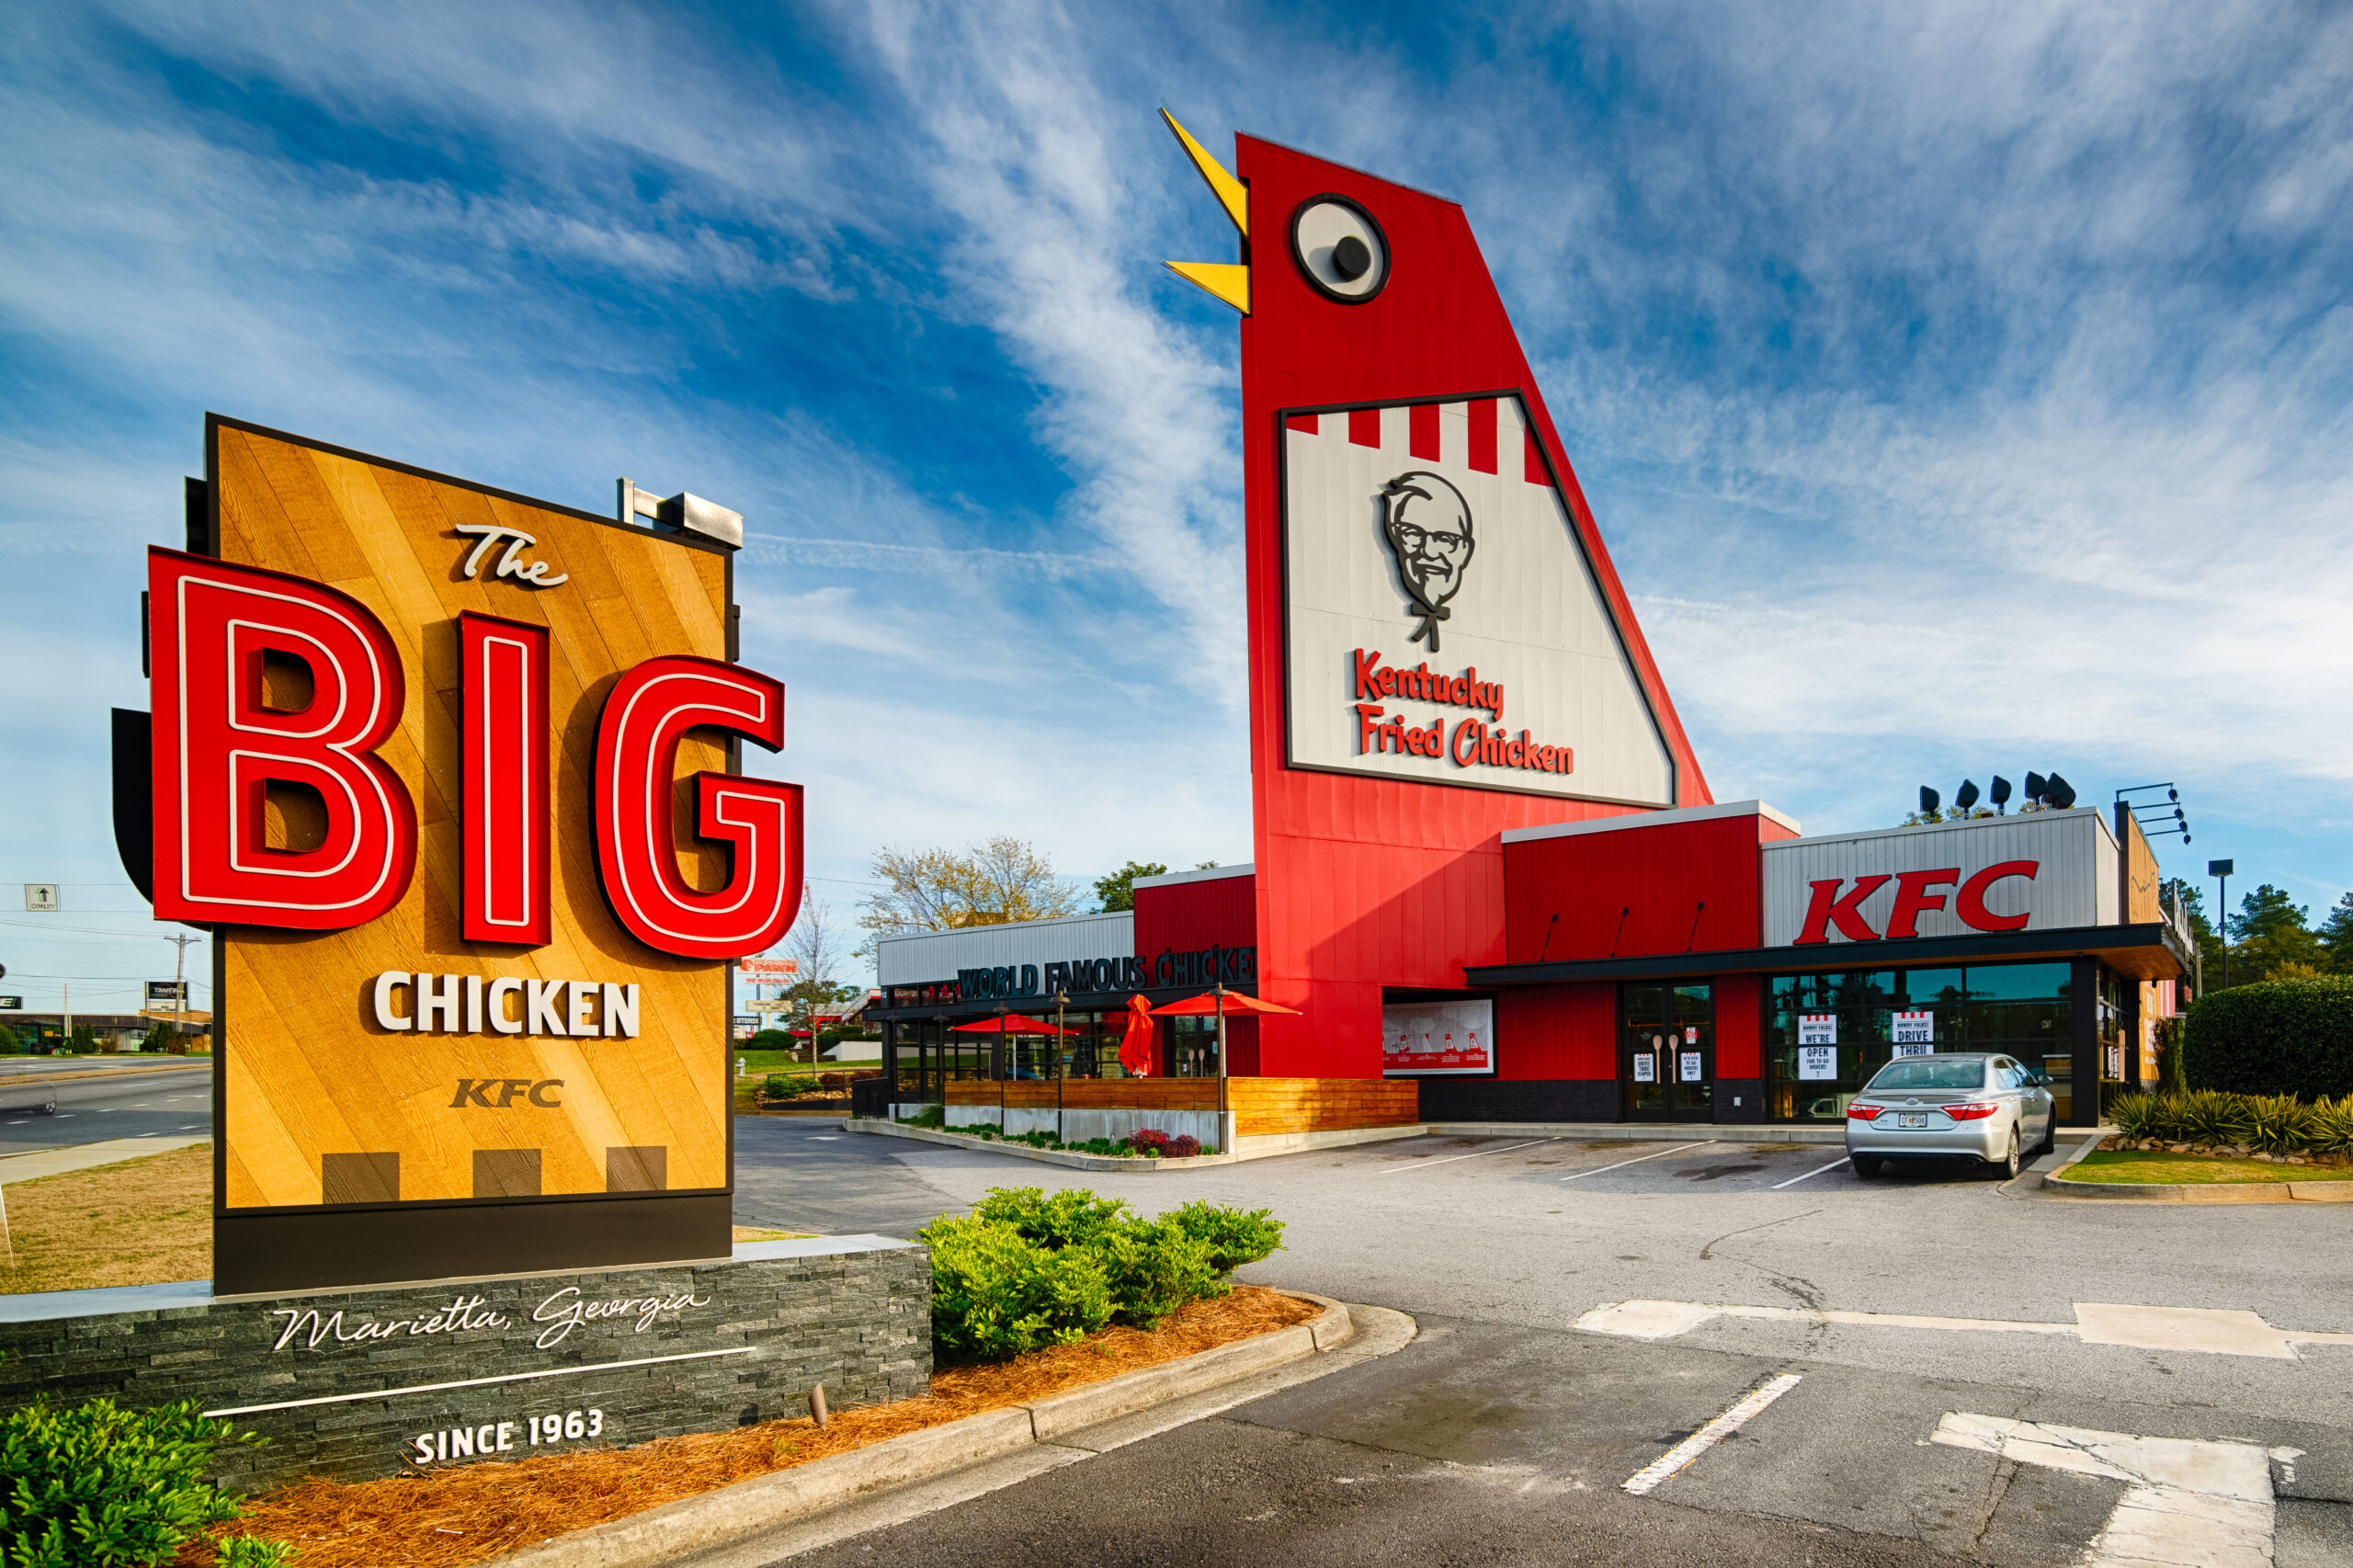 5 Things You Didn't Know About The Big Chicken